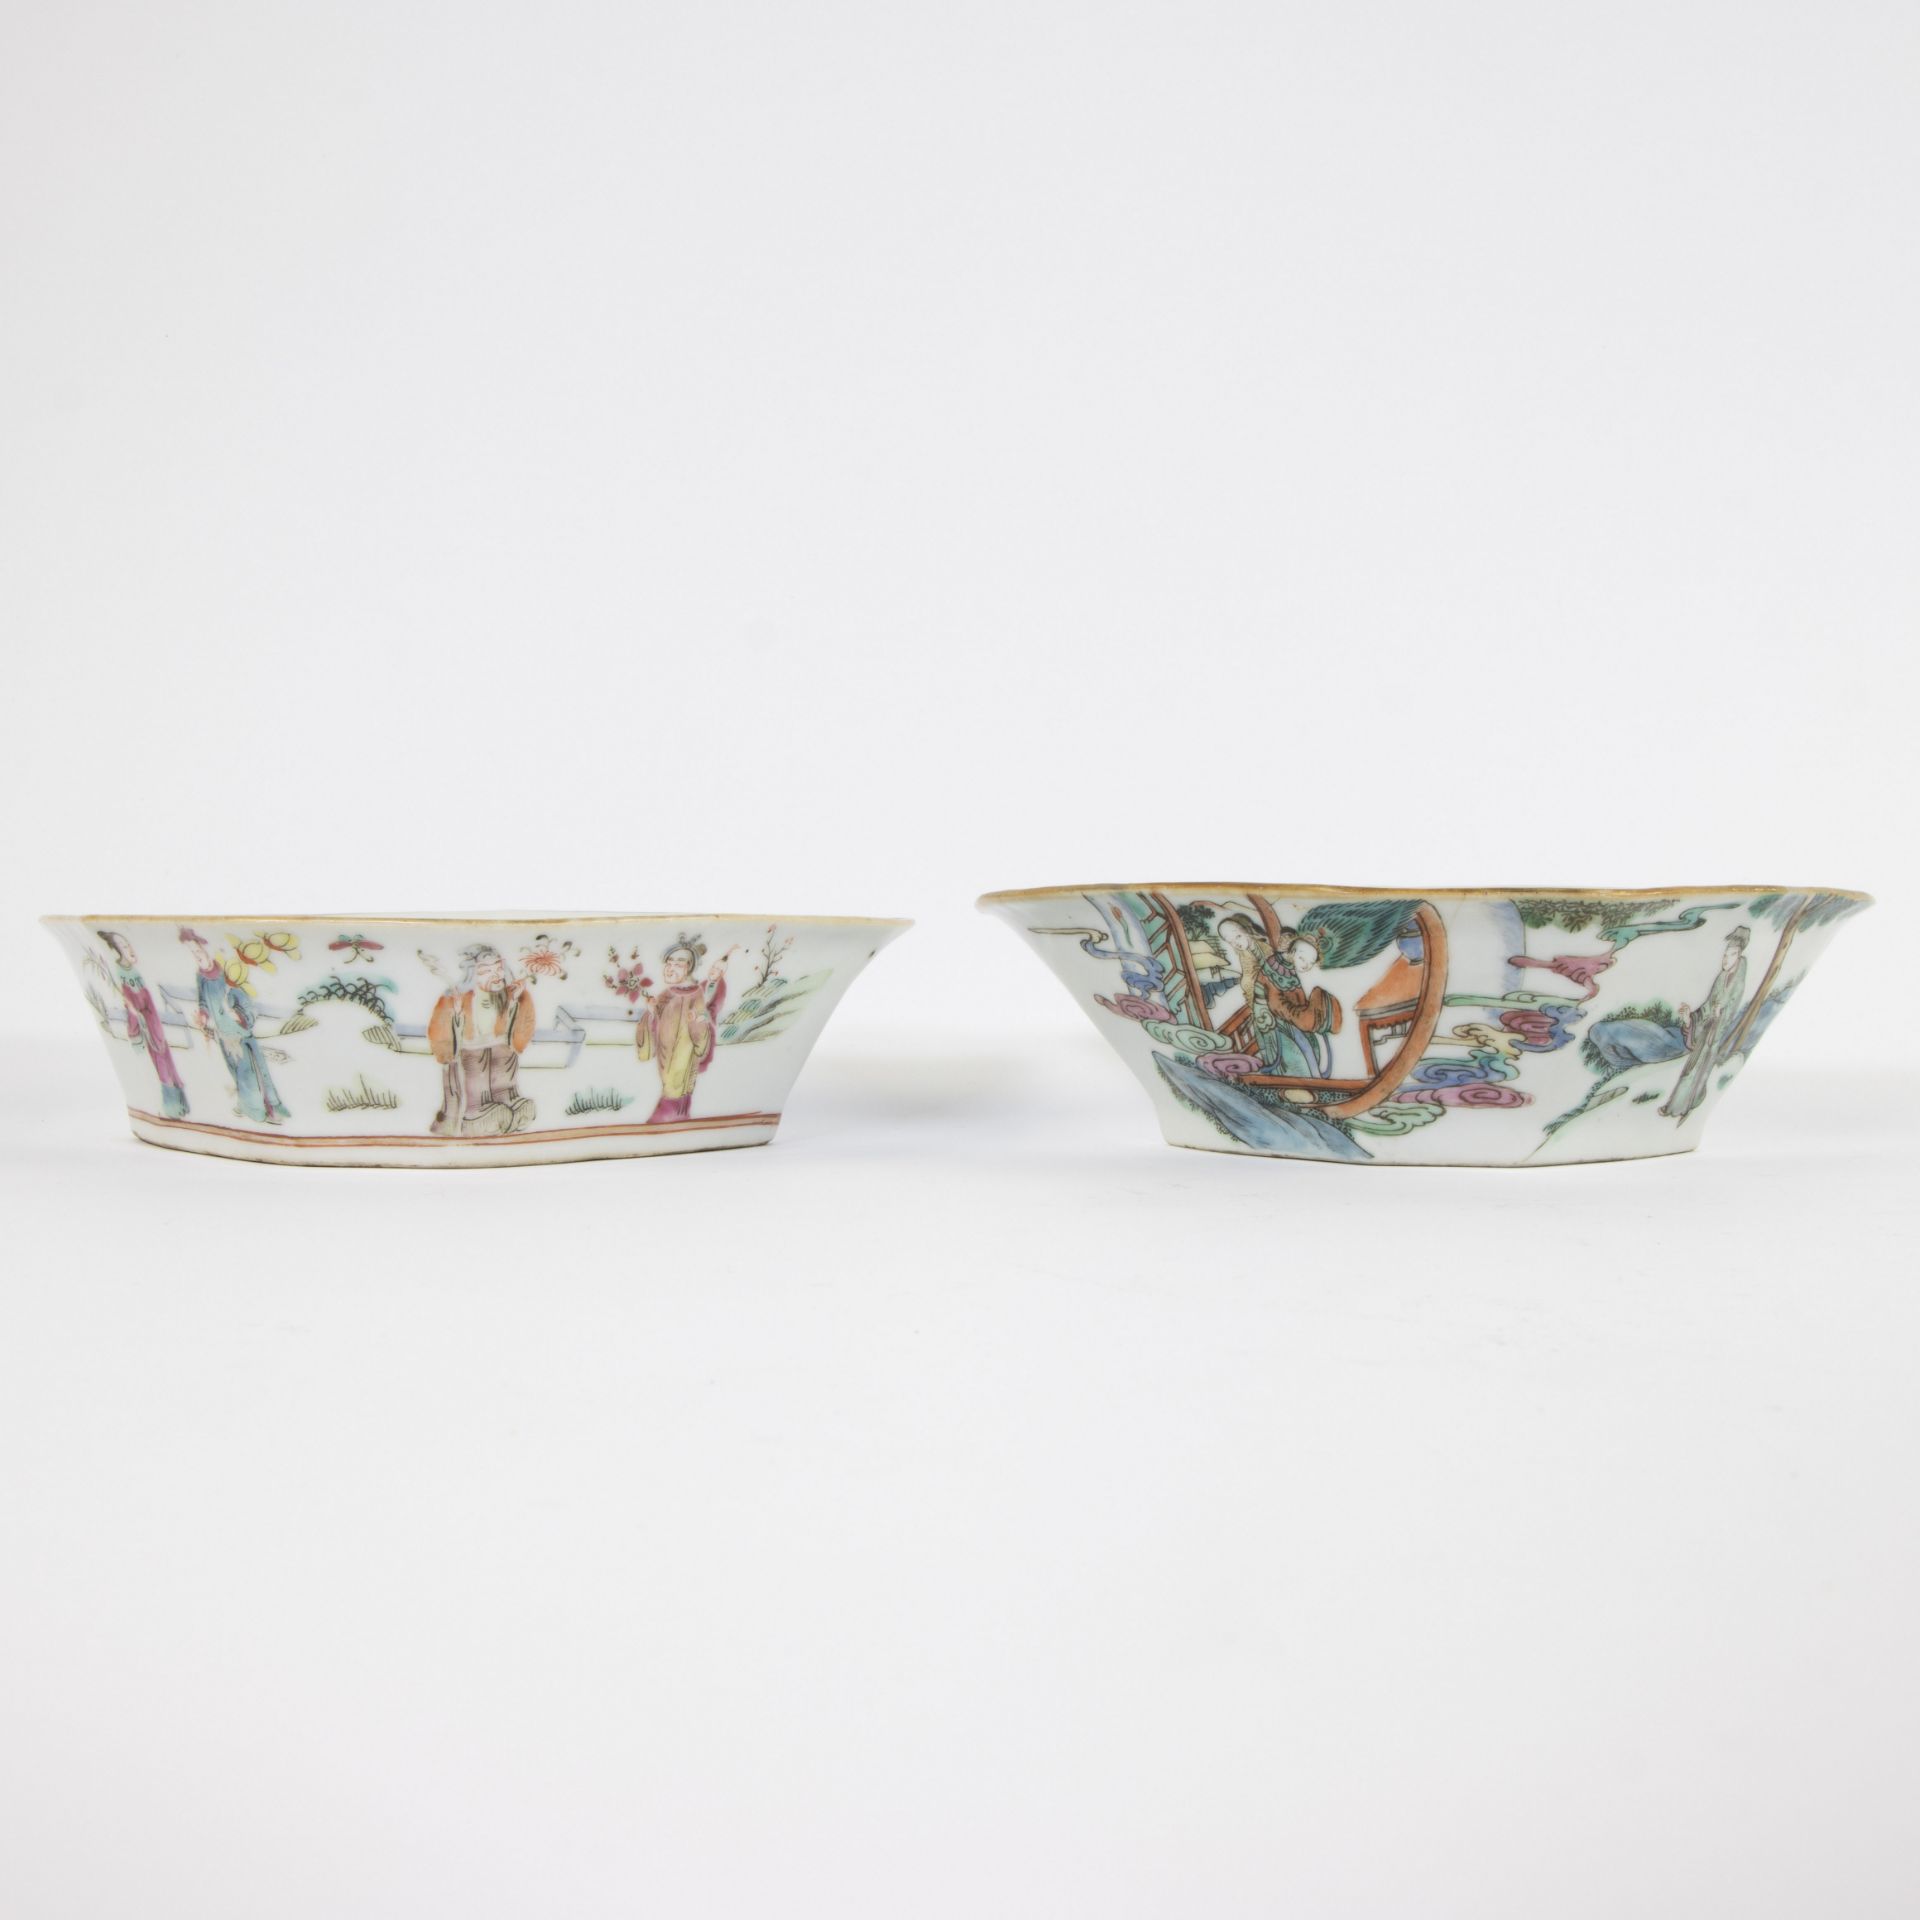 Collection Chinese 2 bowls 1 marked Tongxhi and Imari plate 18th century - Image 4 of 9